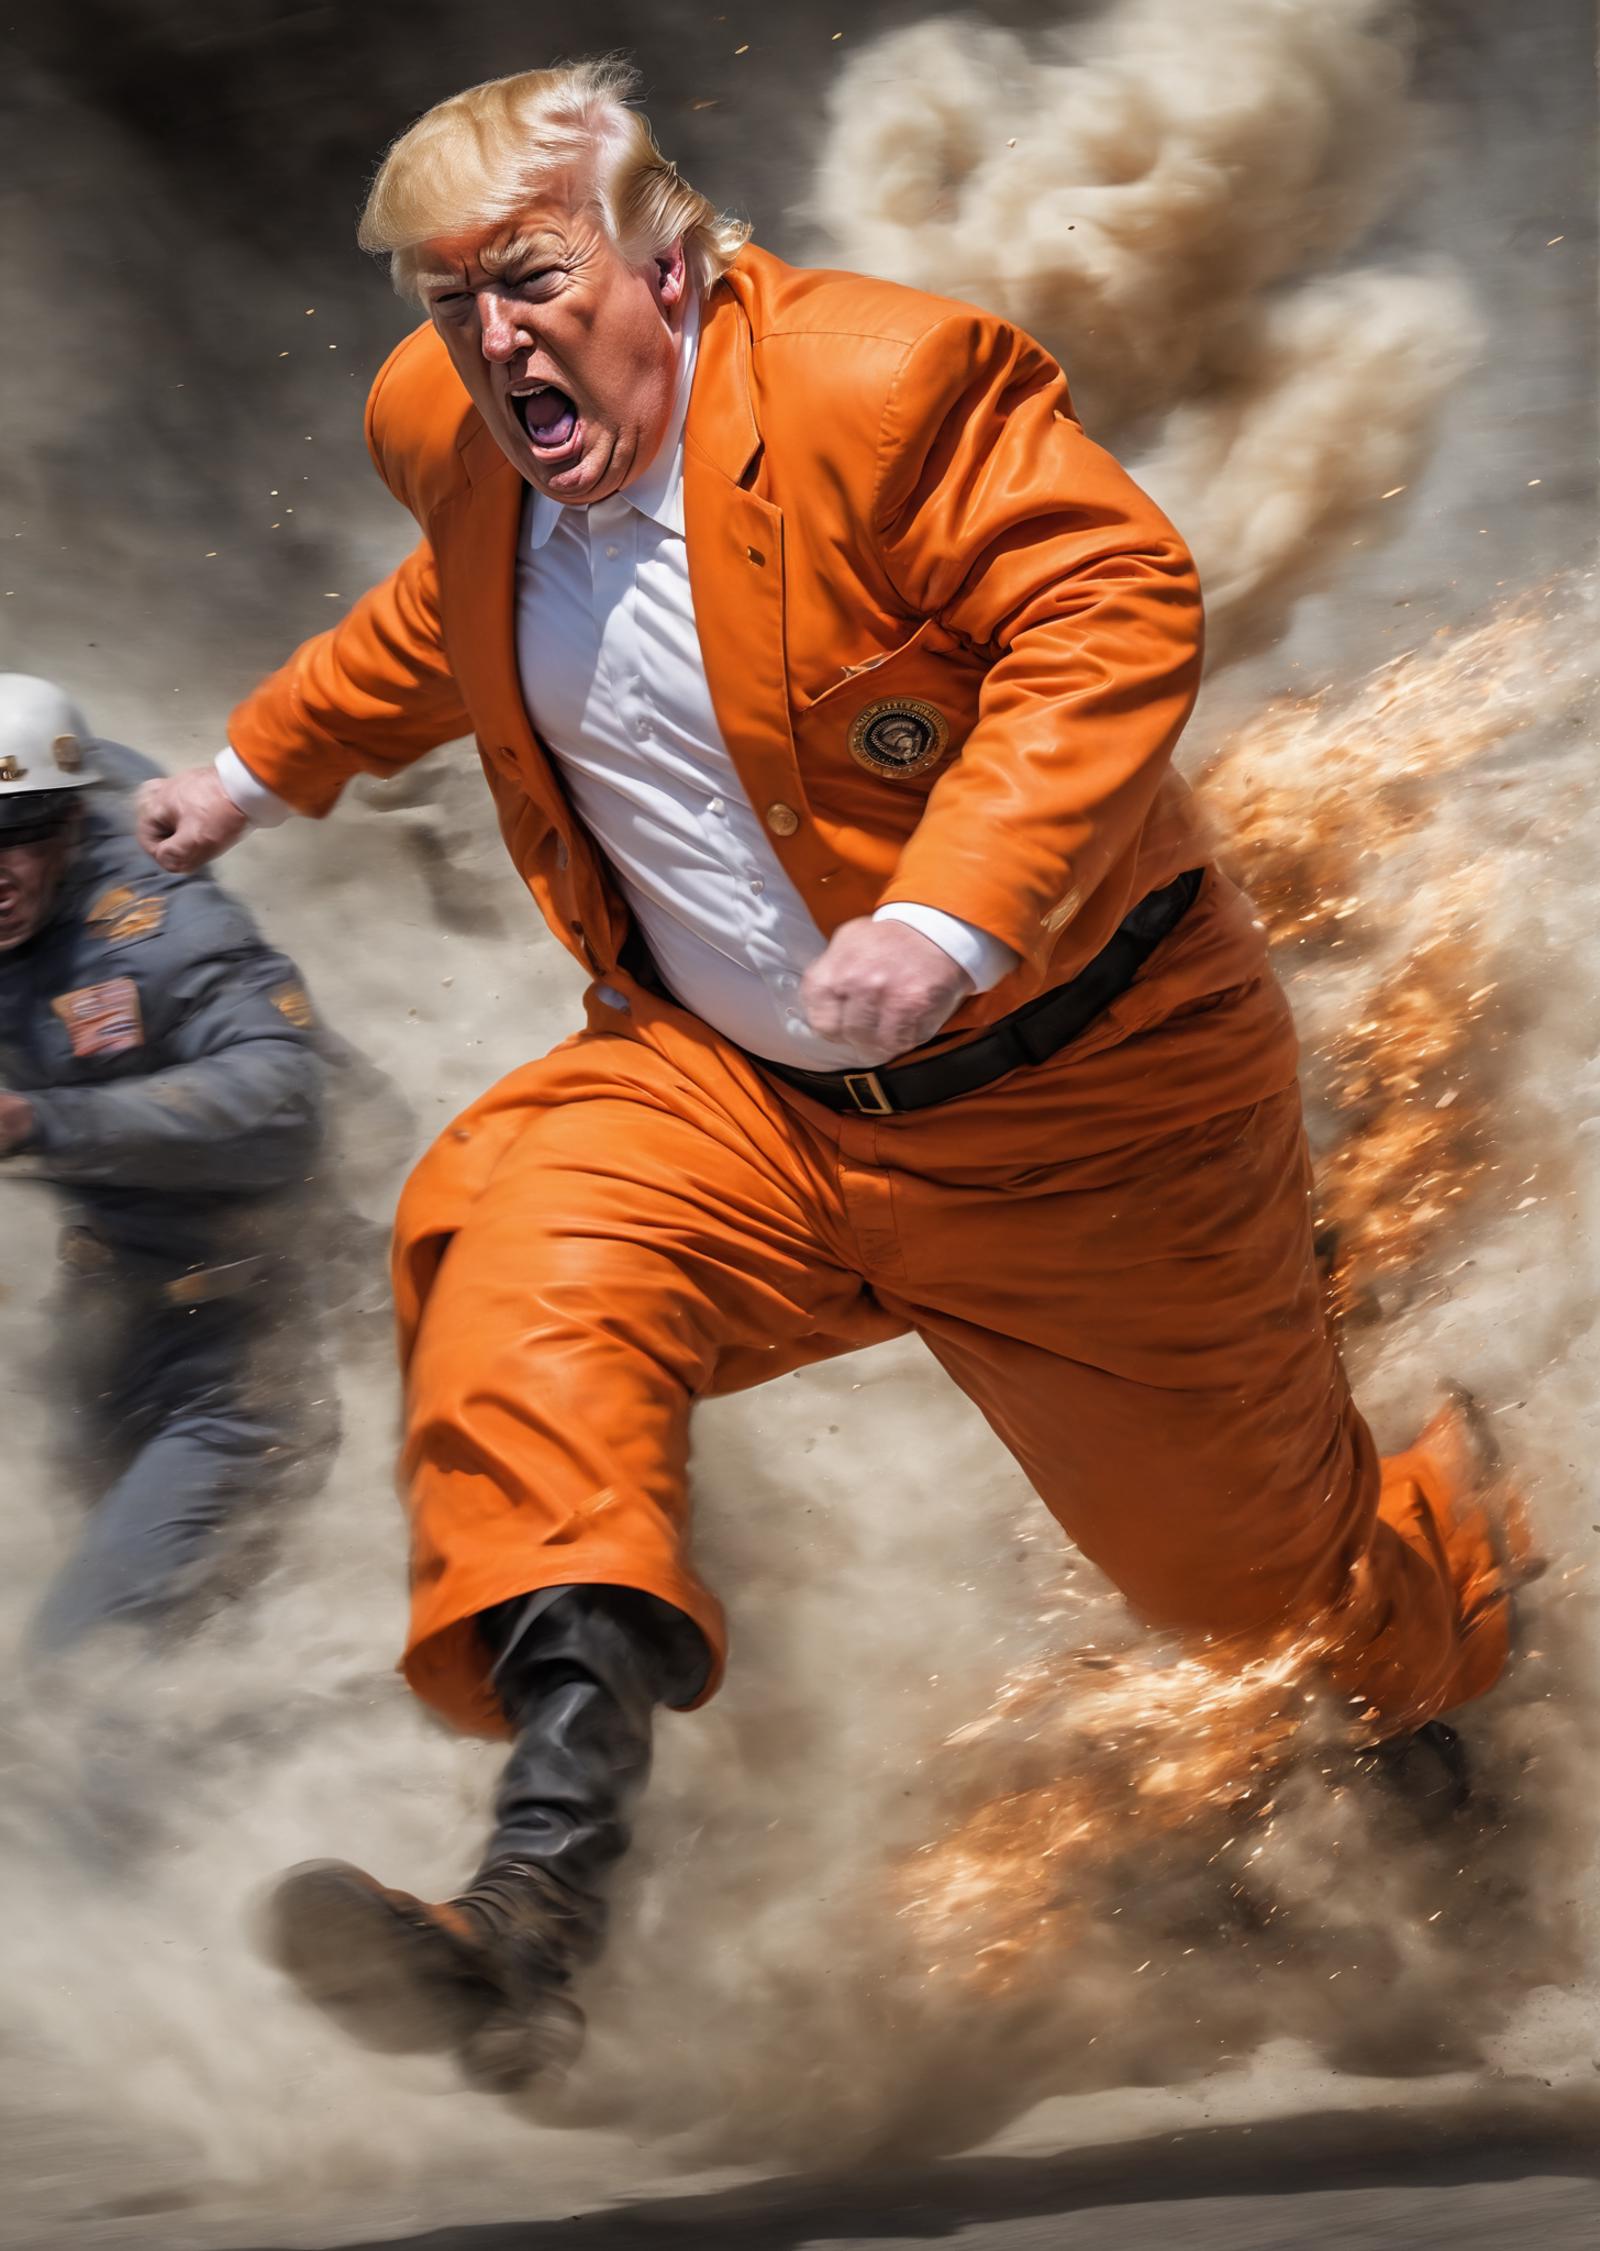 A man wearing an orange suit and white shirt is running.